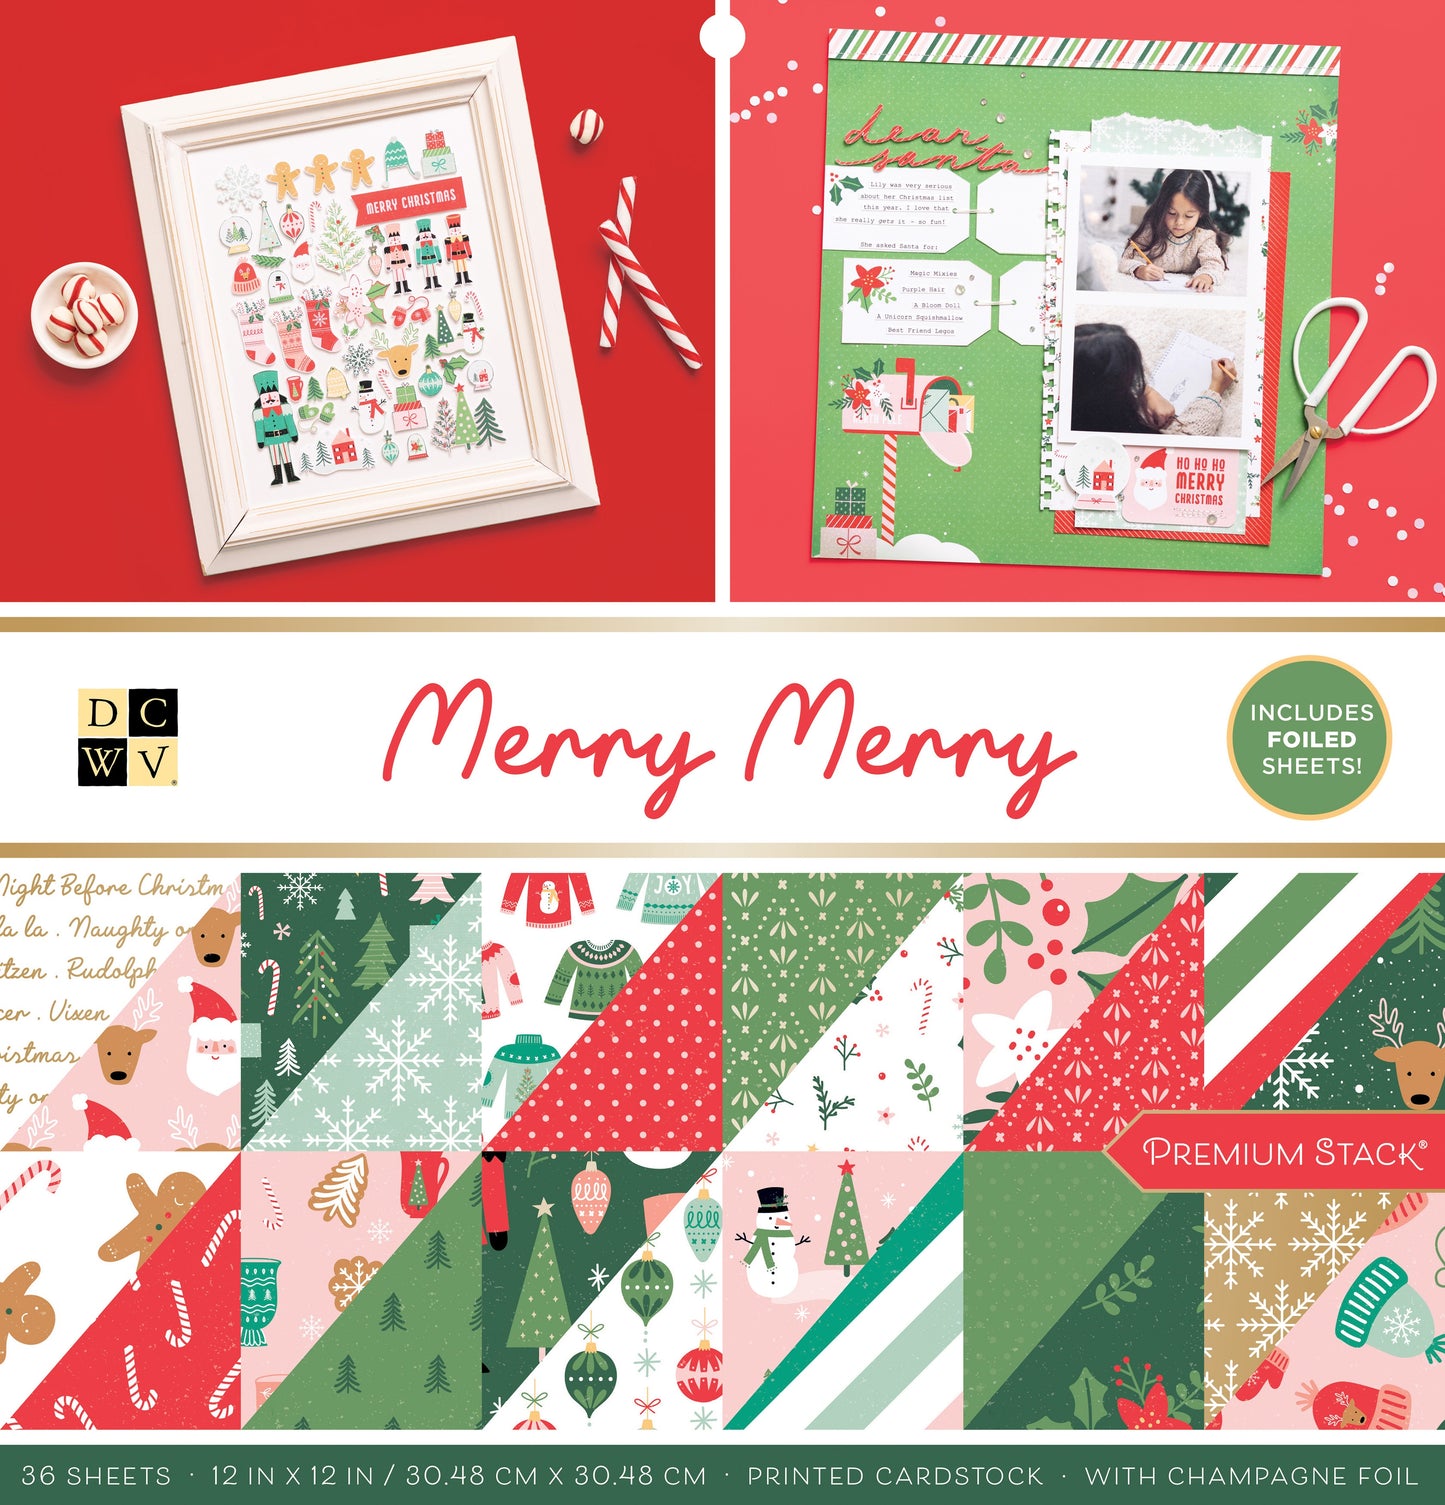 DCWV Double-Sided Cardstock Stack 12"X12" 36/Pkg-Merry Merry, W/Champagne Foil